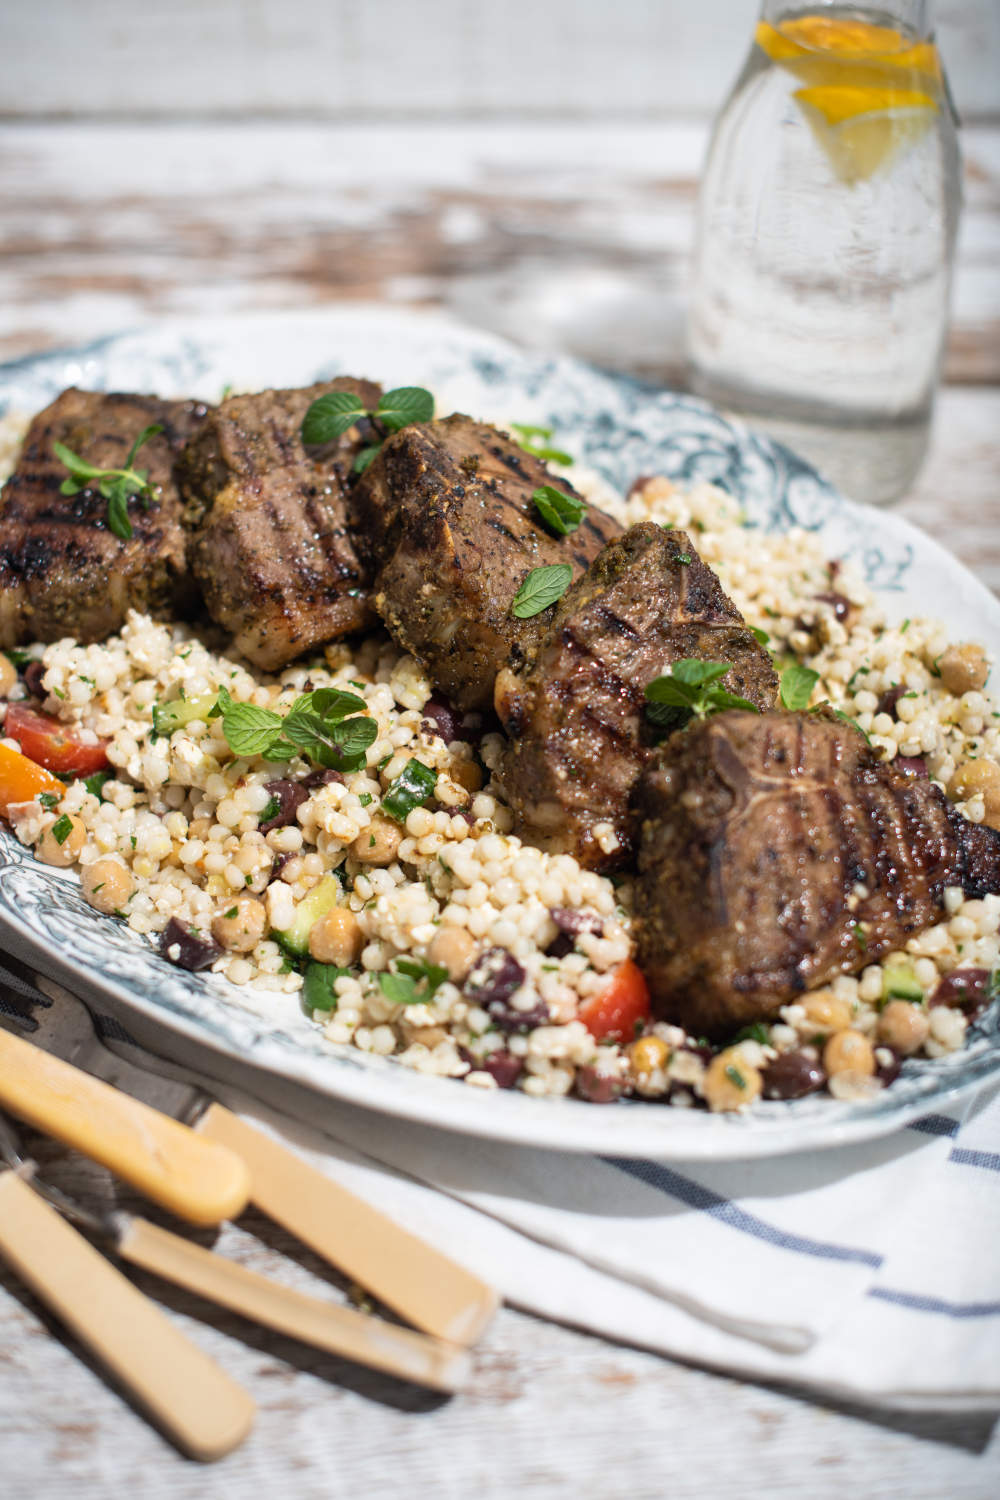 Lamb Chops with Greek Spices and Lemon on Mediterranean Pearl Couscous